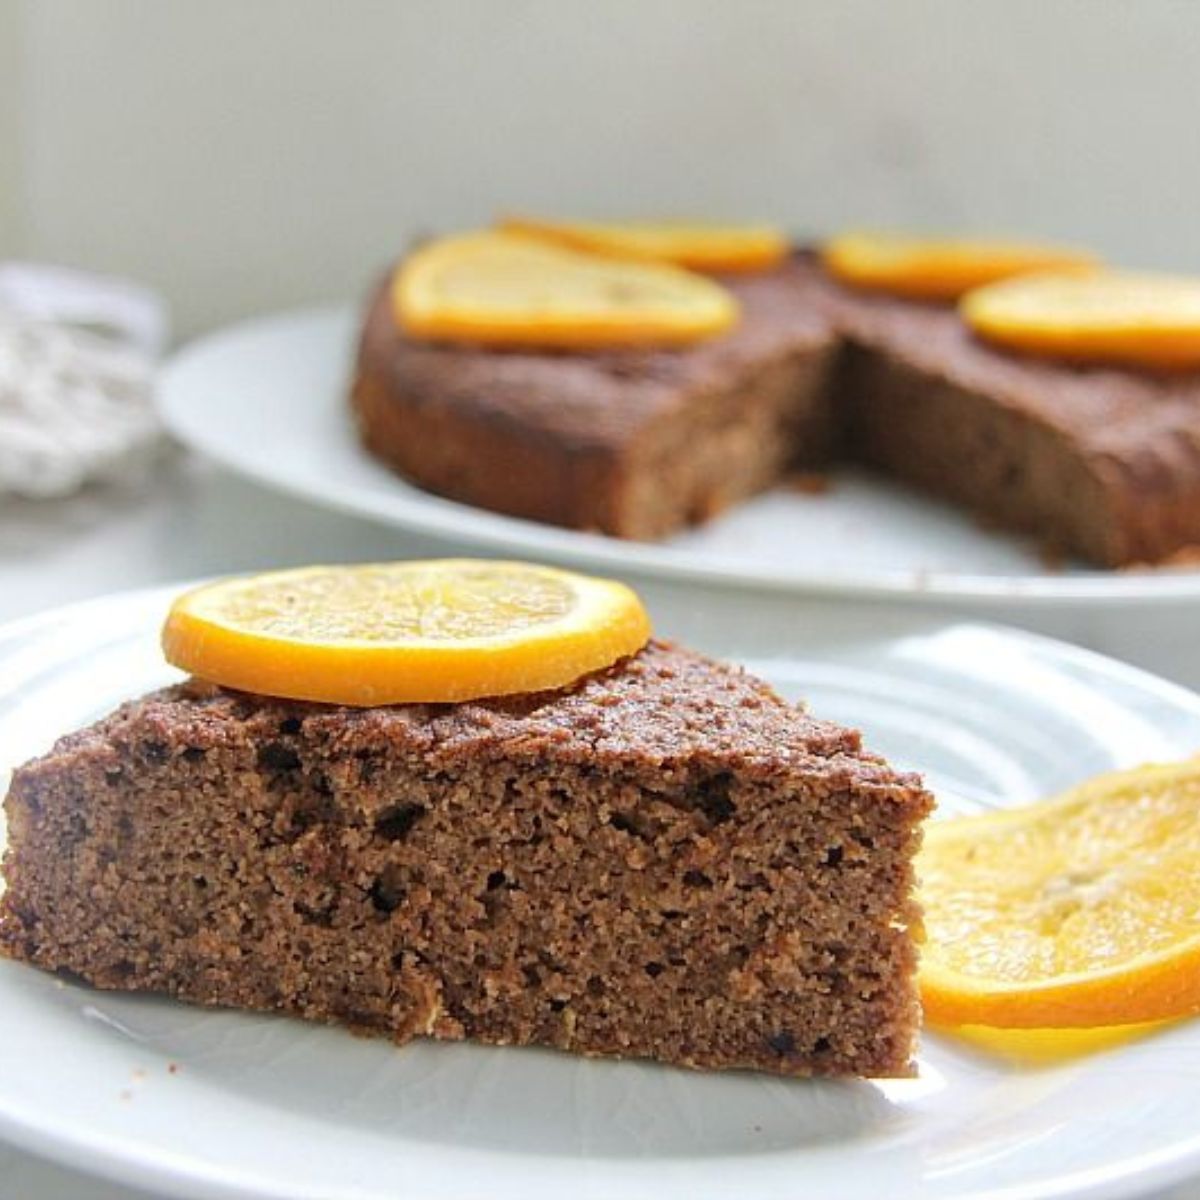 A delicious slice of chocolate cake topped with juicy orange slices.